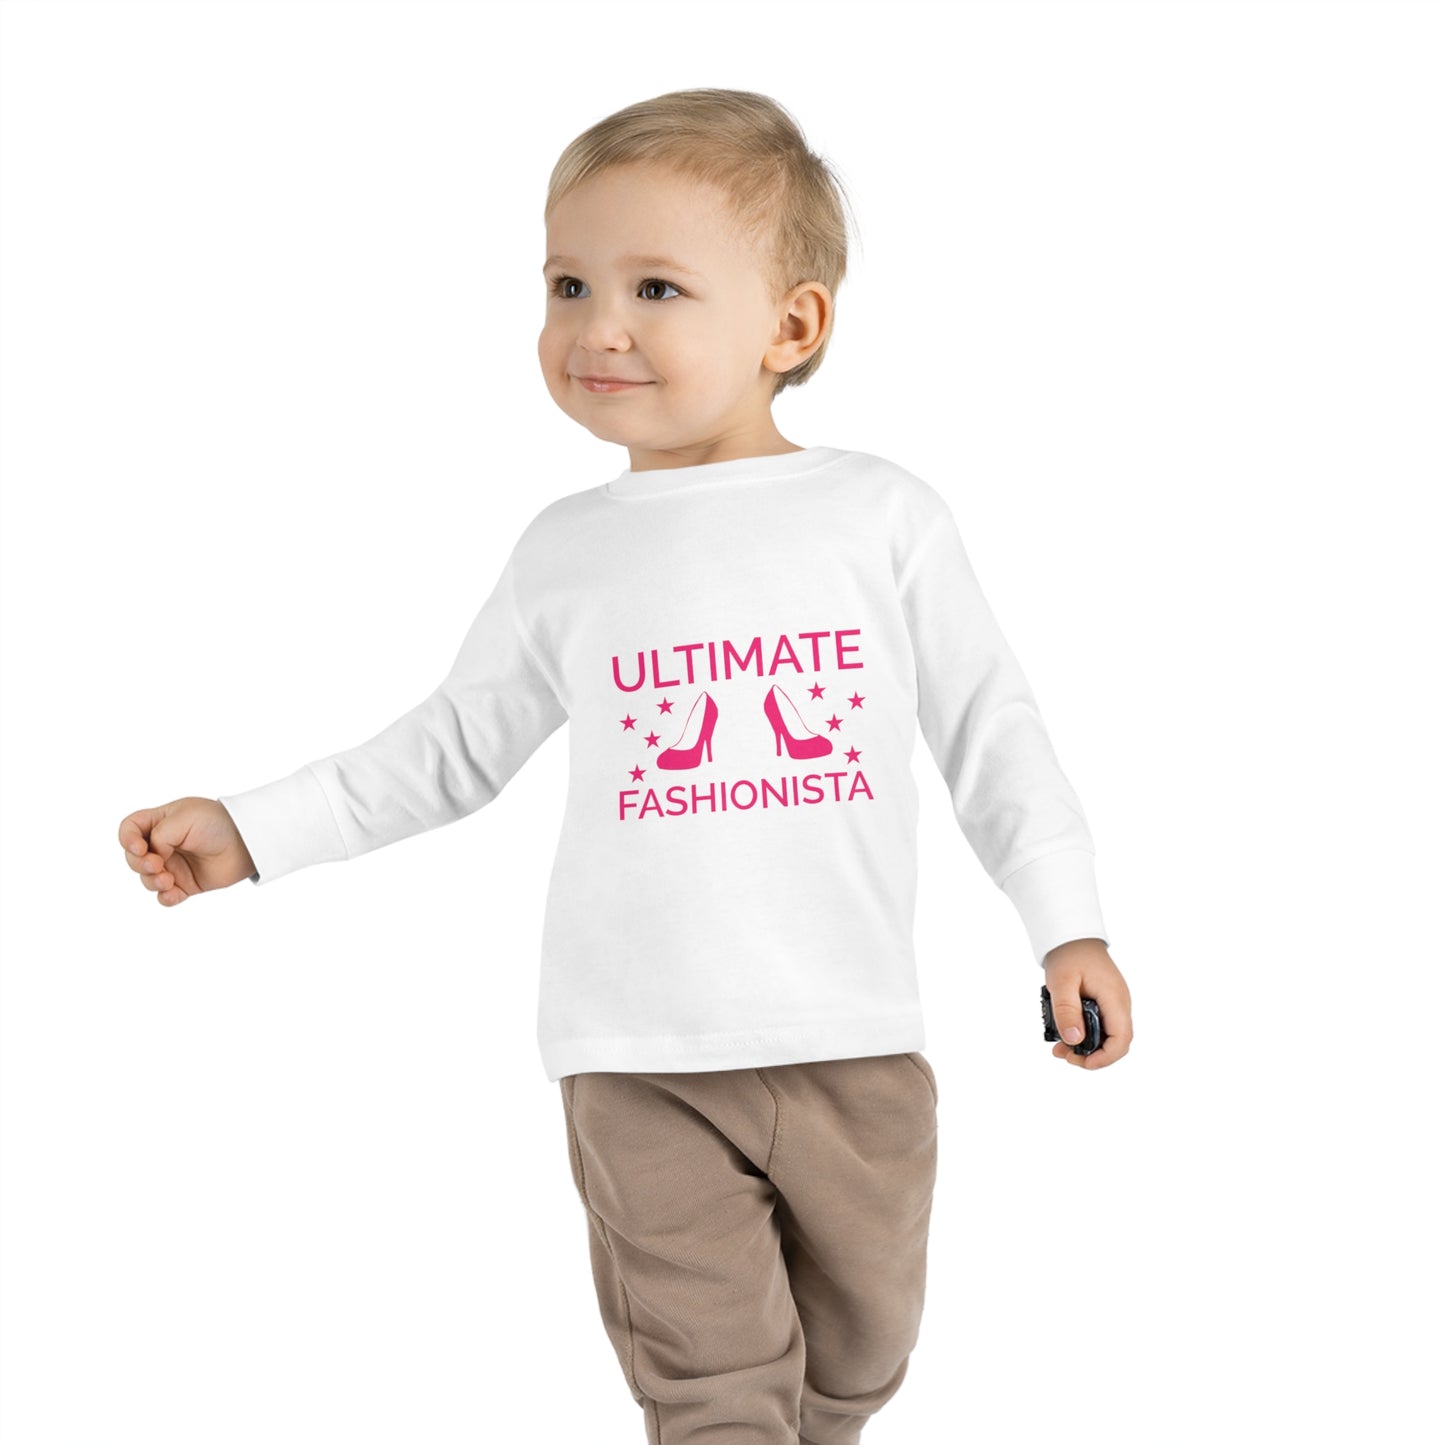 Ultimate Fashionista Toddler Long Sleeve Tee